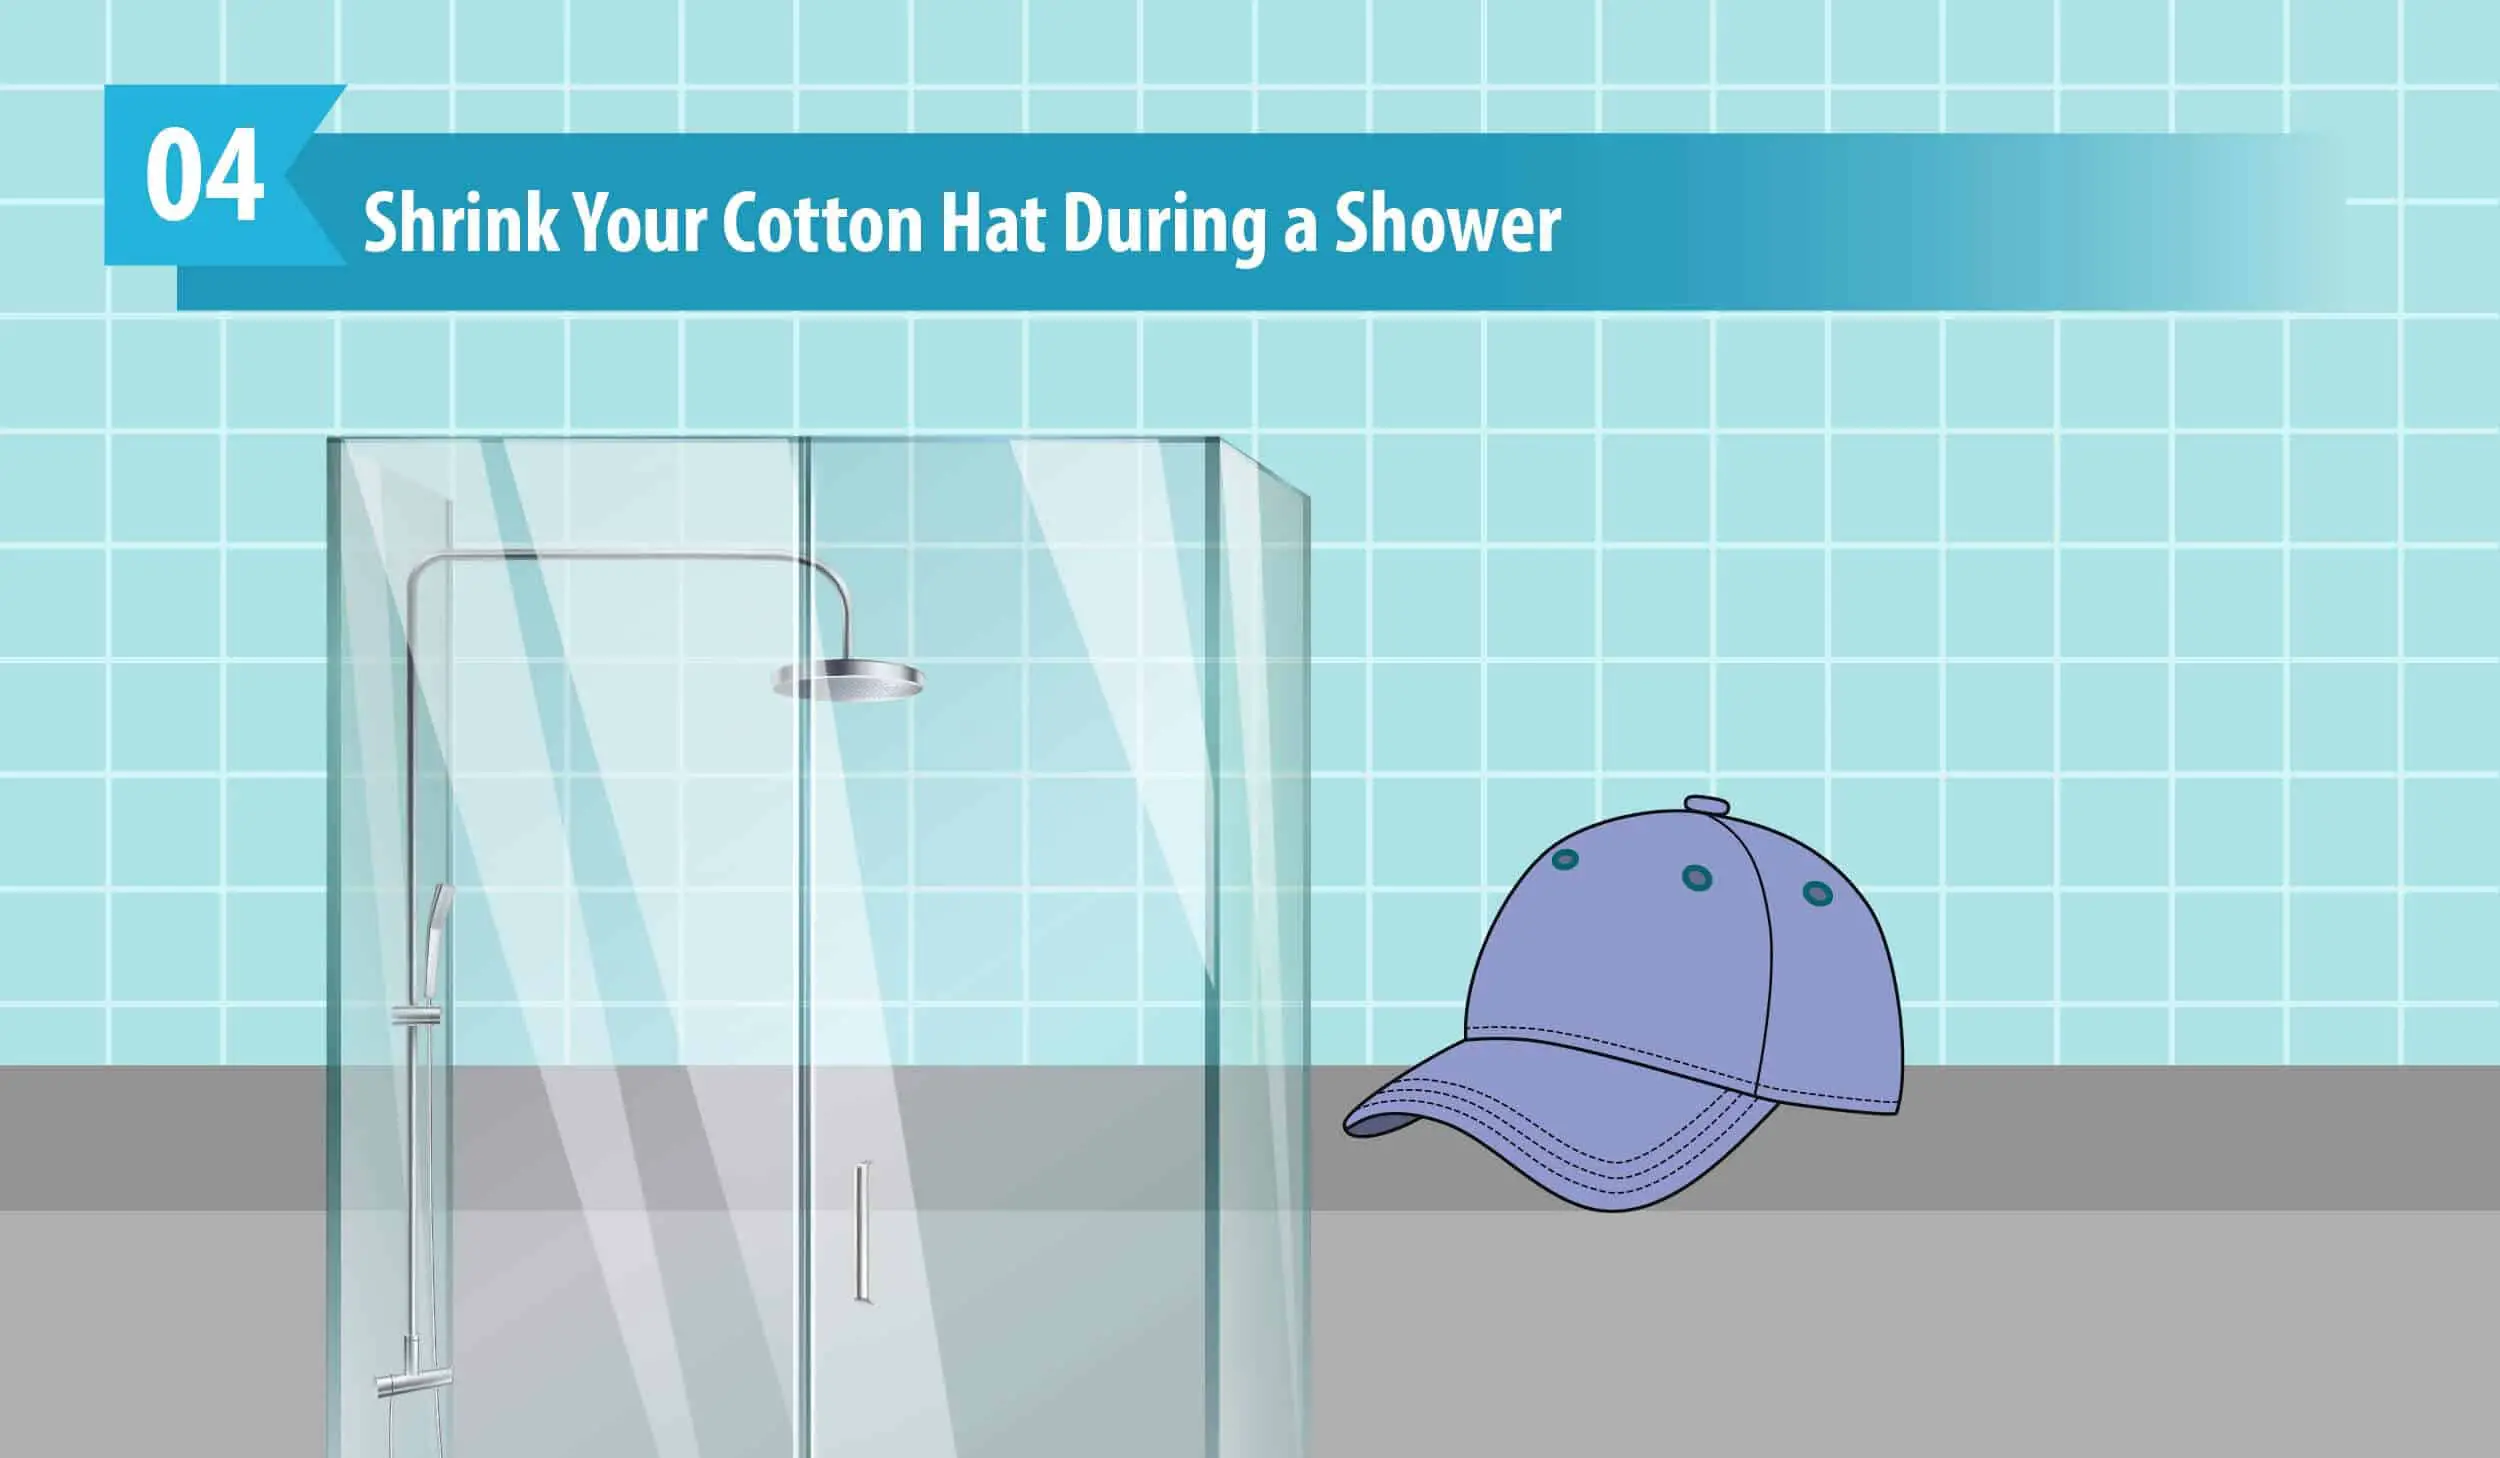 Shrink Your Cotton Hat During a Shower